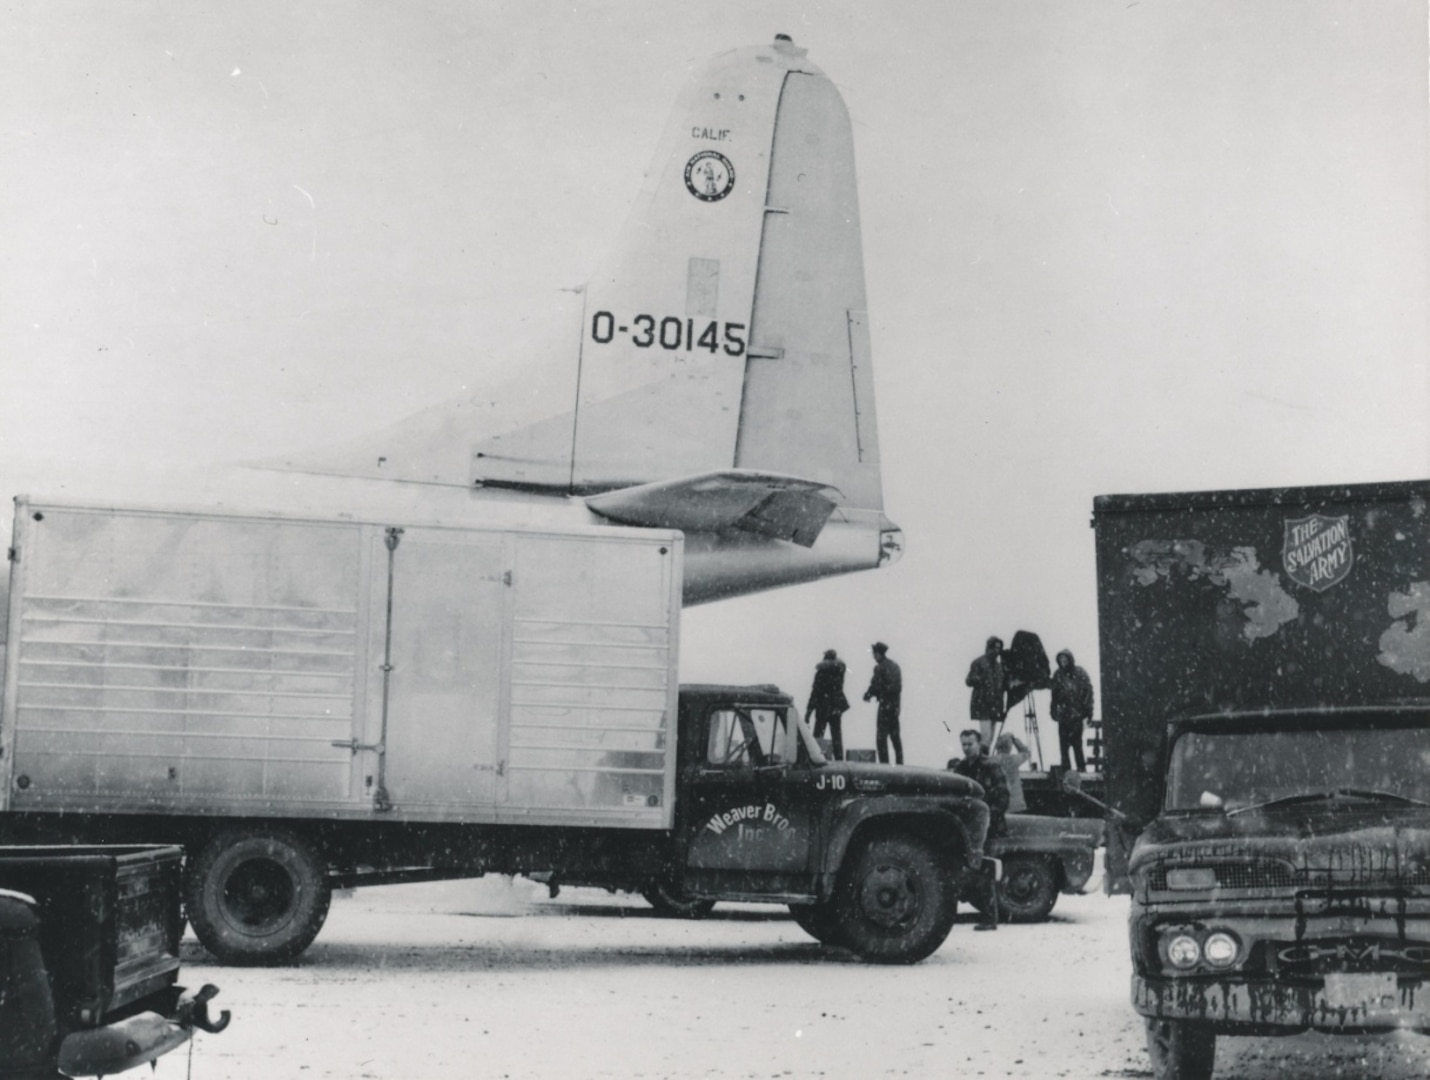 Operation Helping Hand included aircraft such as this C-97 from the 146th Transport Wing, California Air National Guard, Van Nuys, Calif., flying relief supplies distributed by volunteers.